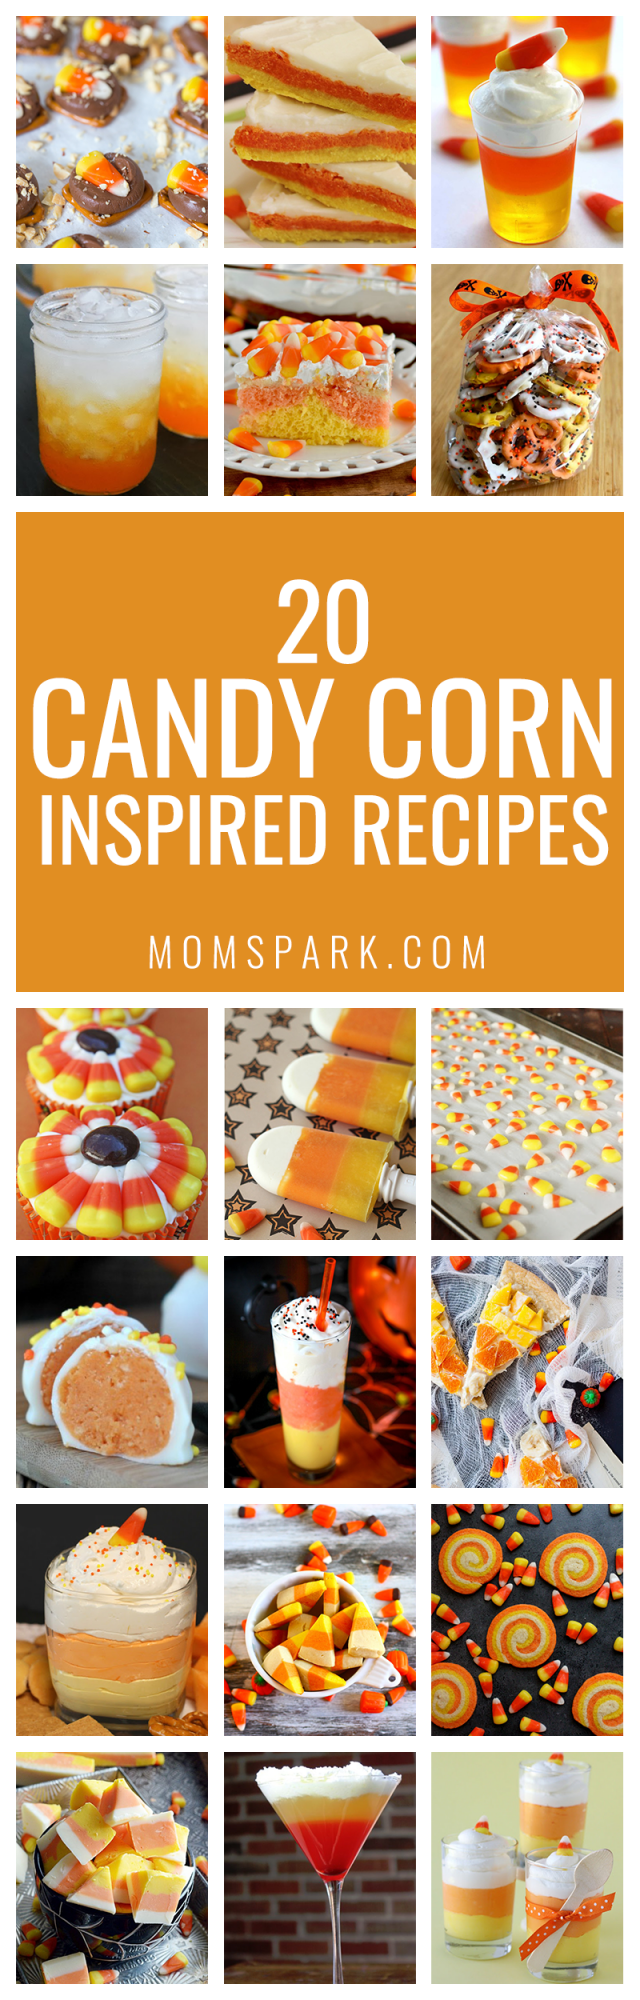 20 Candy Corn Inspired Recipes for Halloween